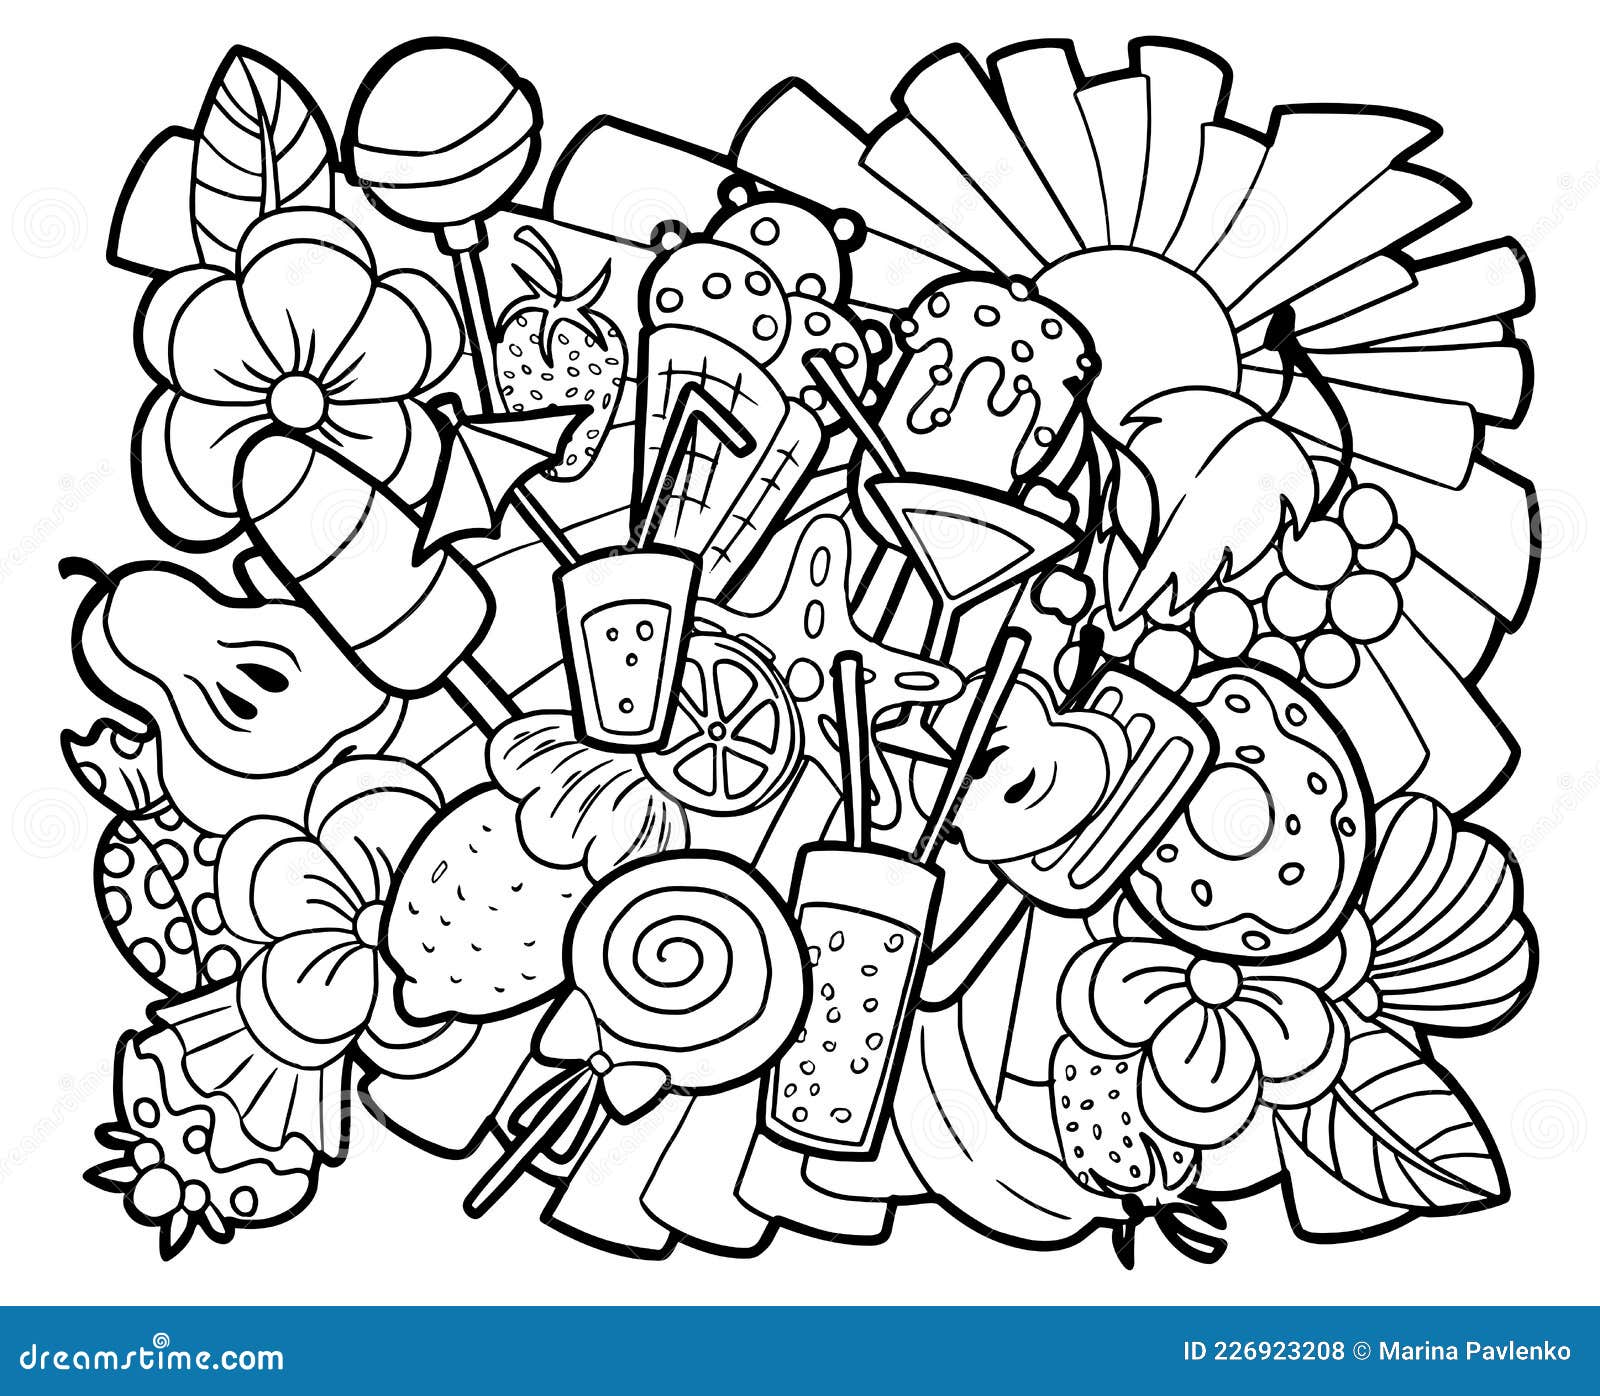 Summer Vibes Coloring Page. Black and White Illustration. Stock Vector ...